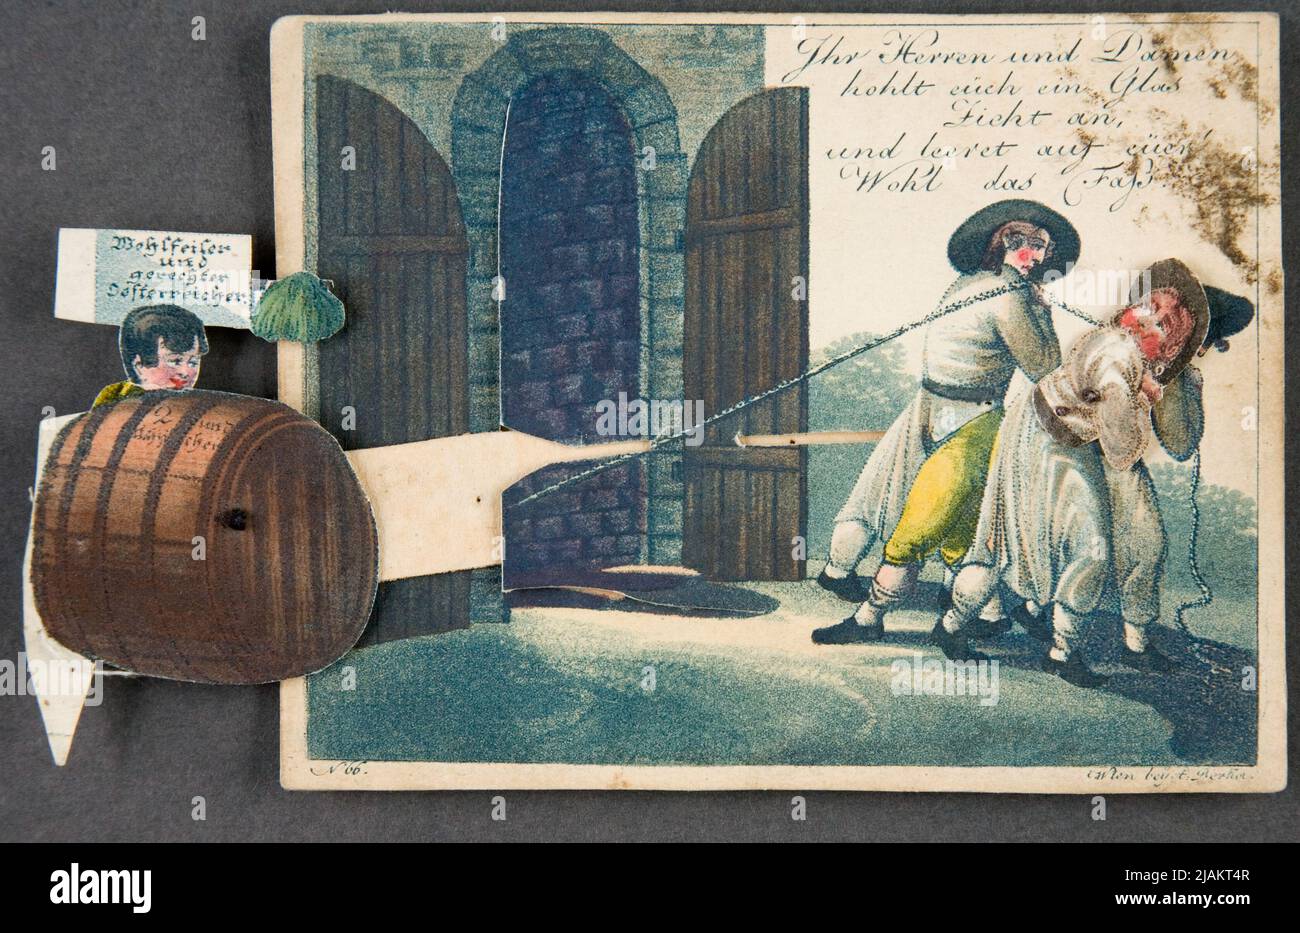 Moving toy: A keg of beer is better than a glass from: Paper toys from the Biedermeier era Berchot, A. Stock Photo